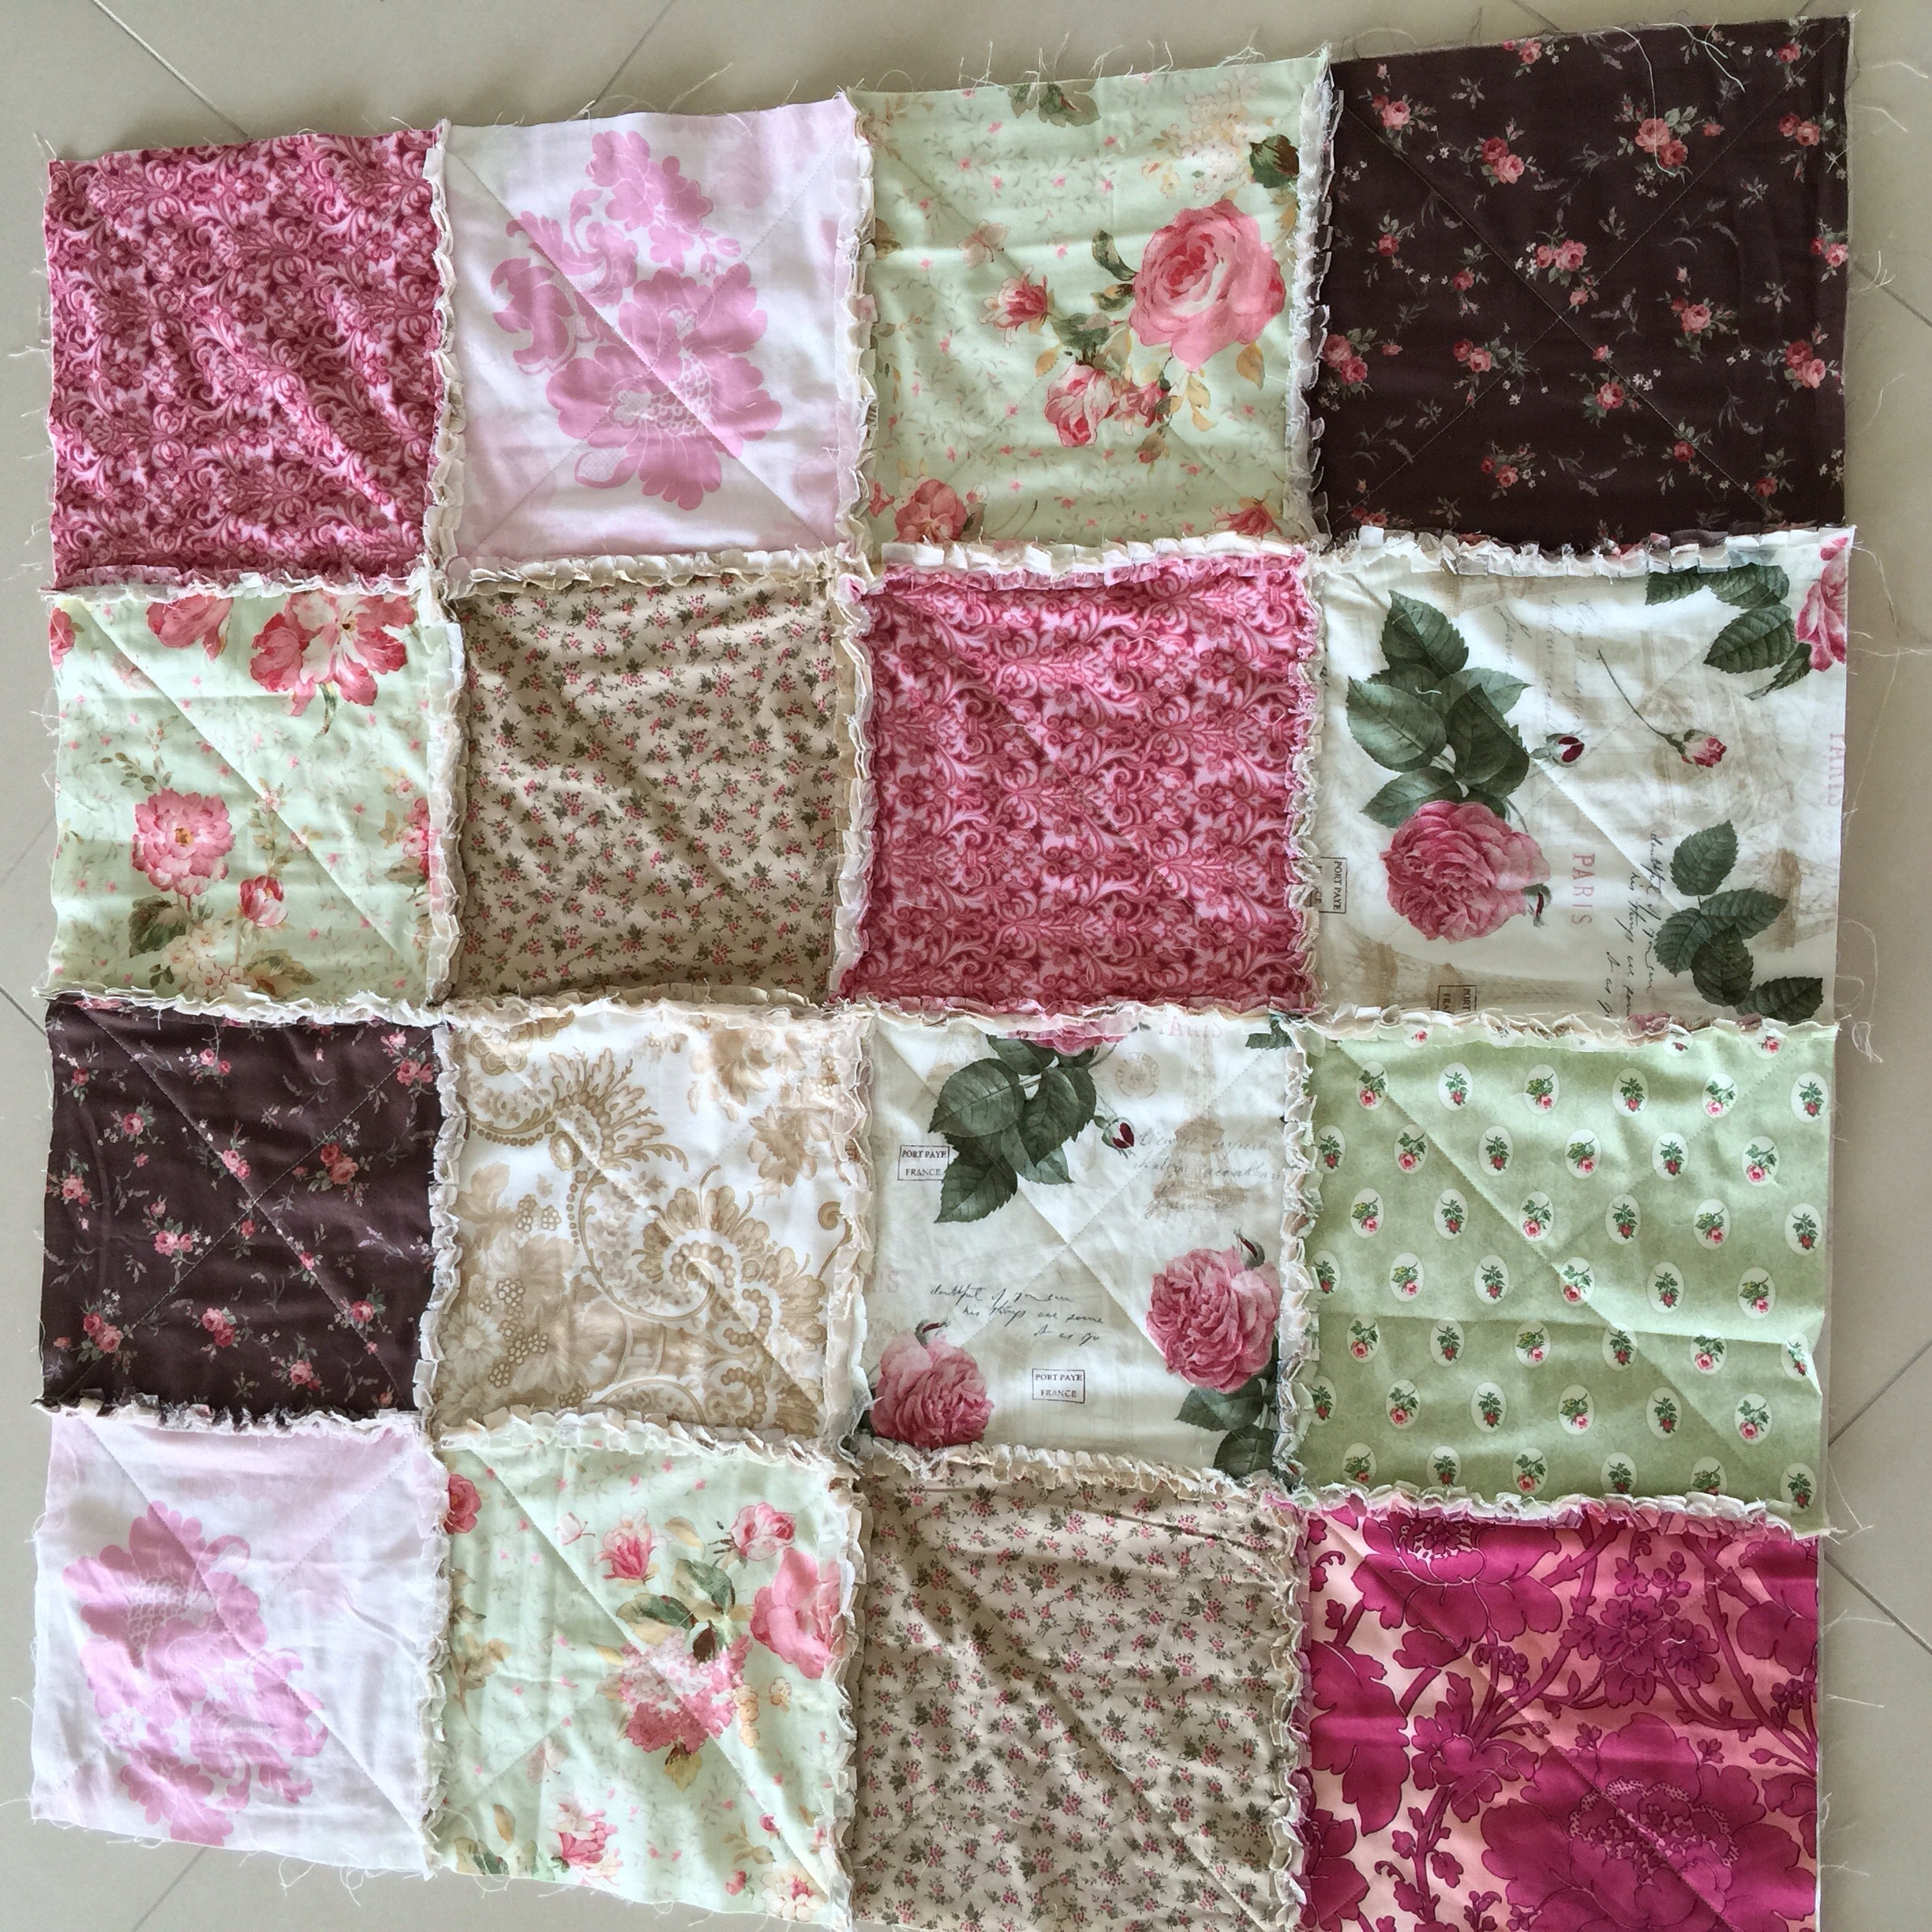 How To Quilt As You Go: Another Delightful Quilting Technique